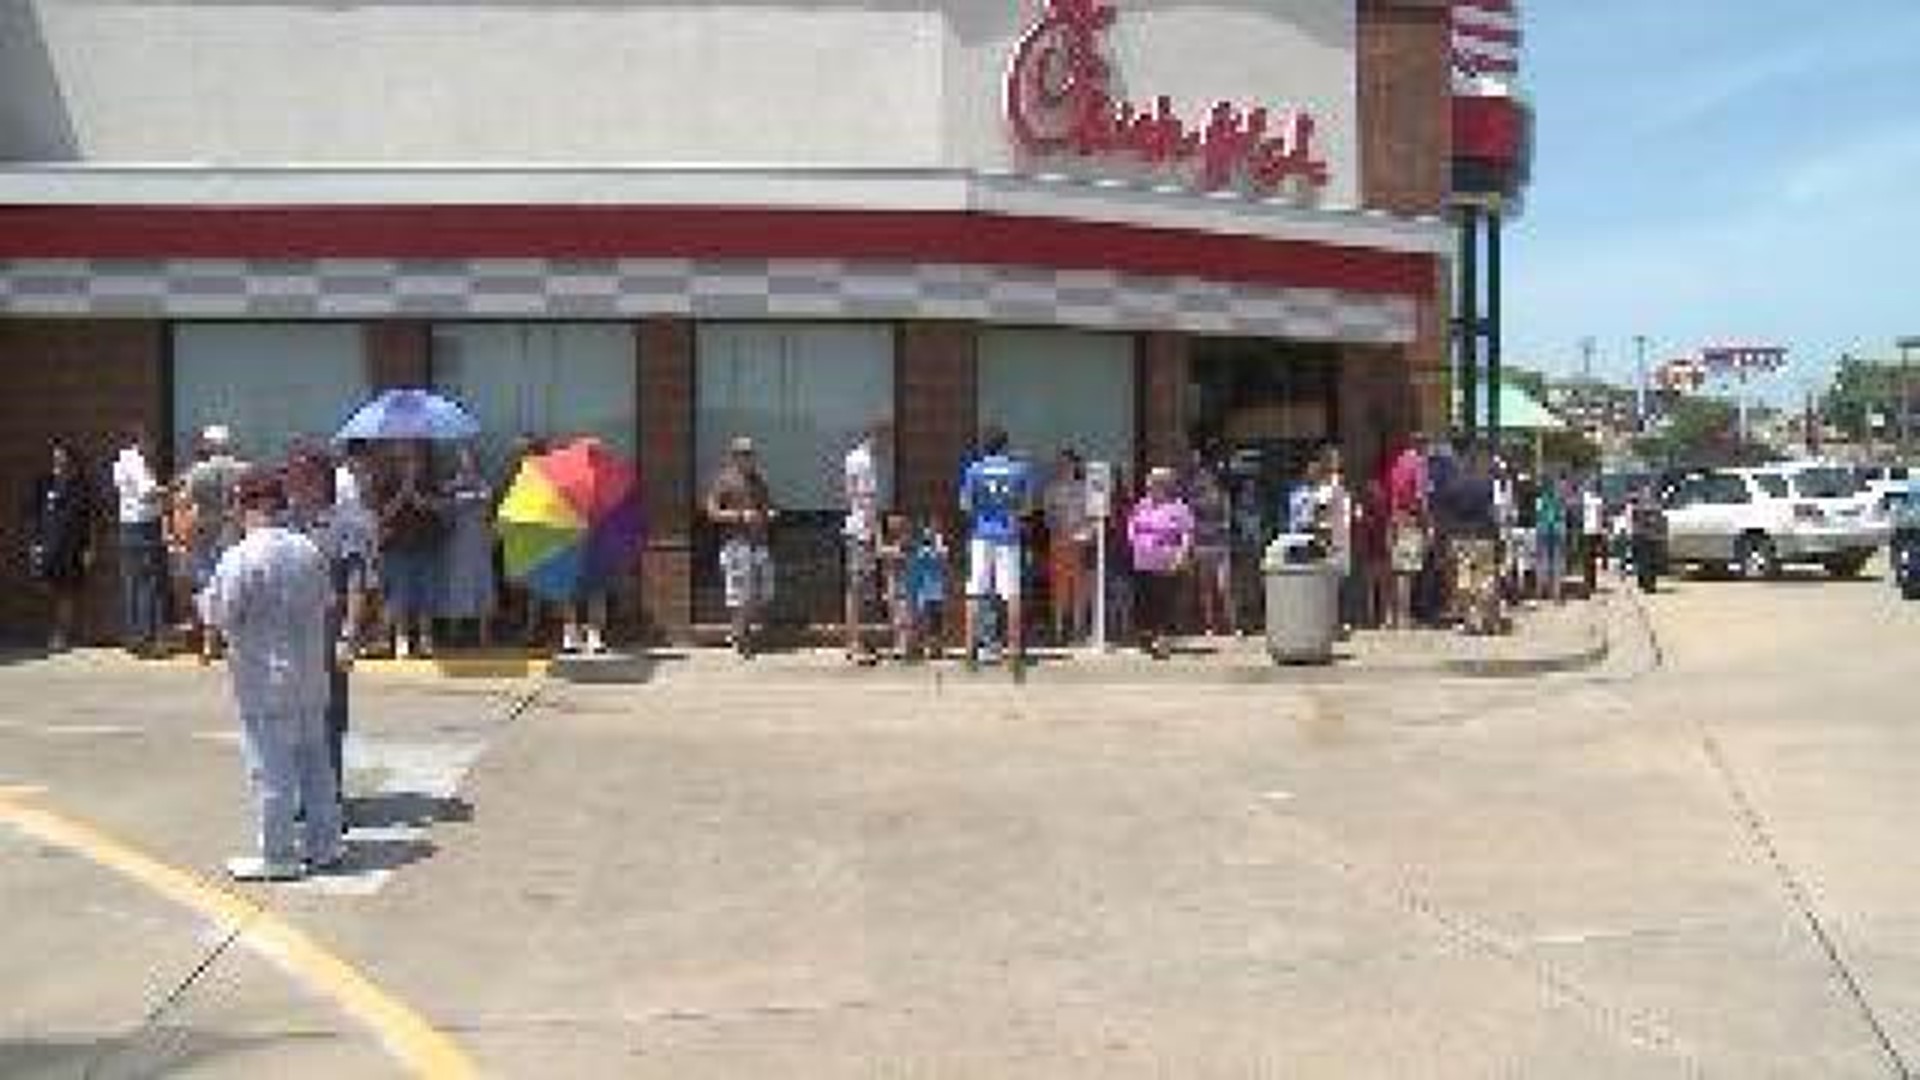 Protestors, Supporters Gather at Local Chik-Fil-A Restaurants